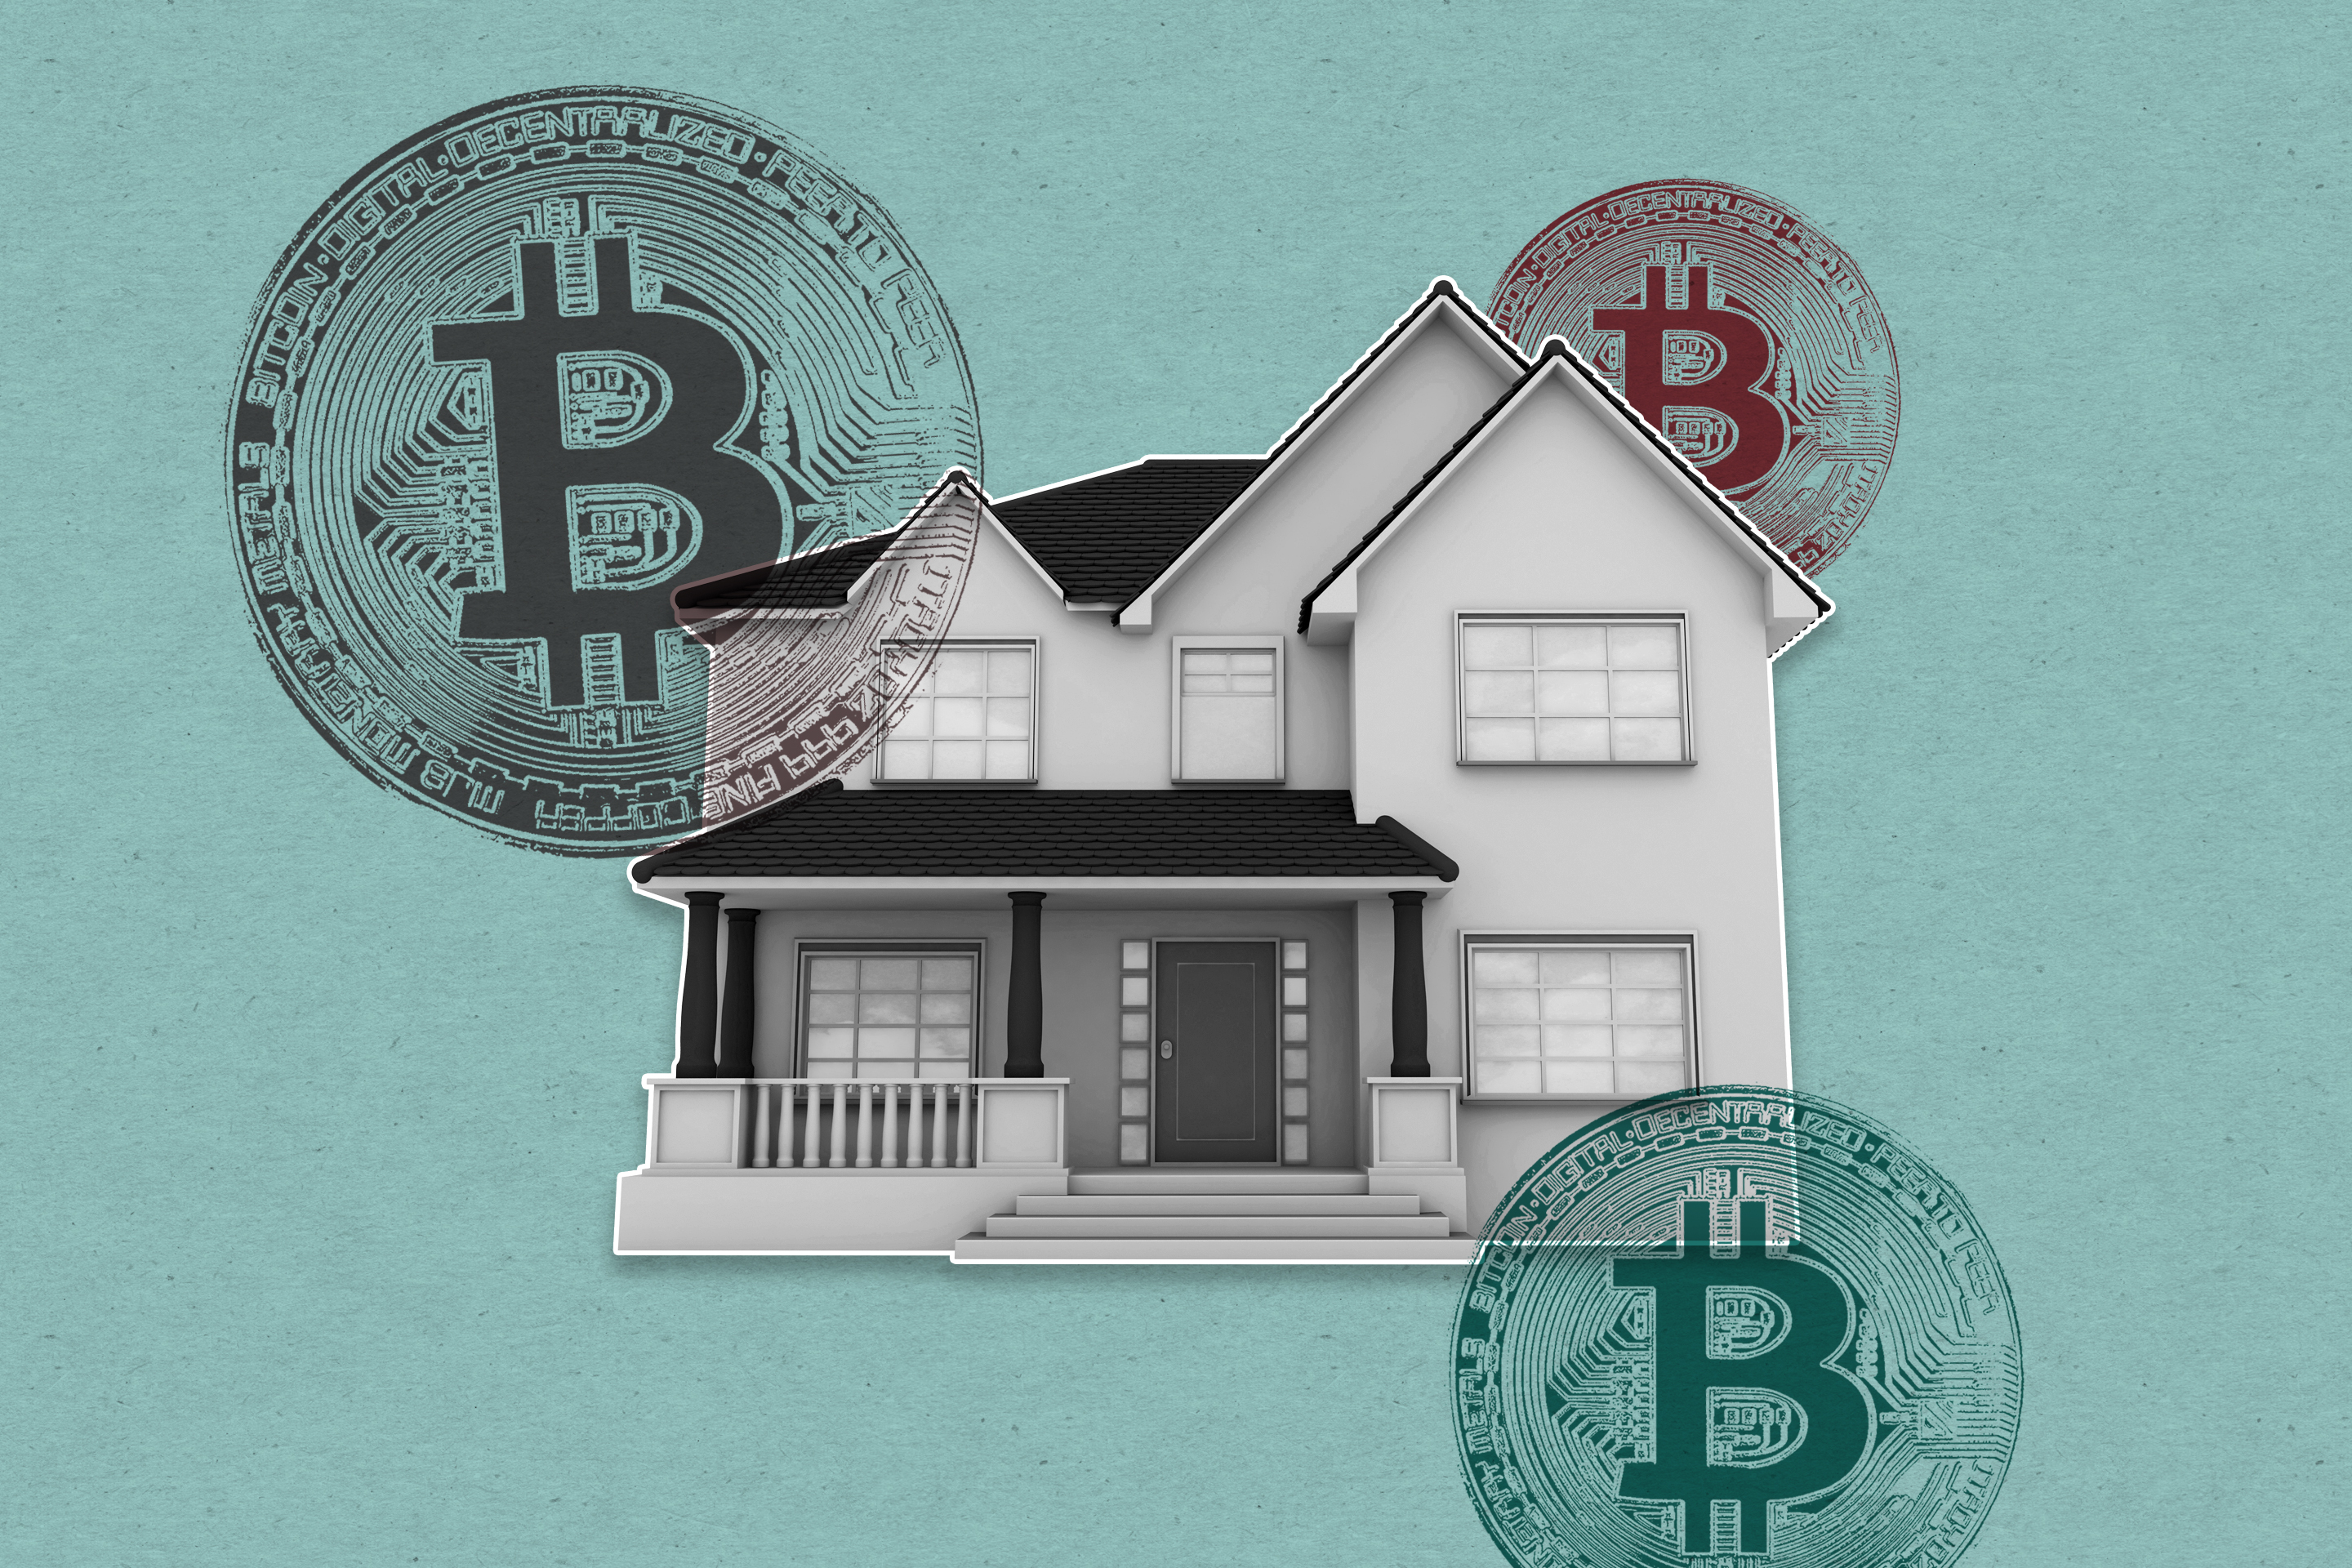 A Surprisingly Large Number of First-Time Homebuyers Are Funding Their Down Payments With Crypto Profits